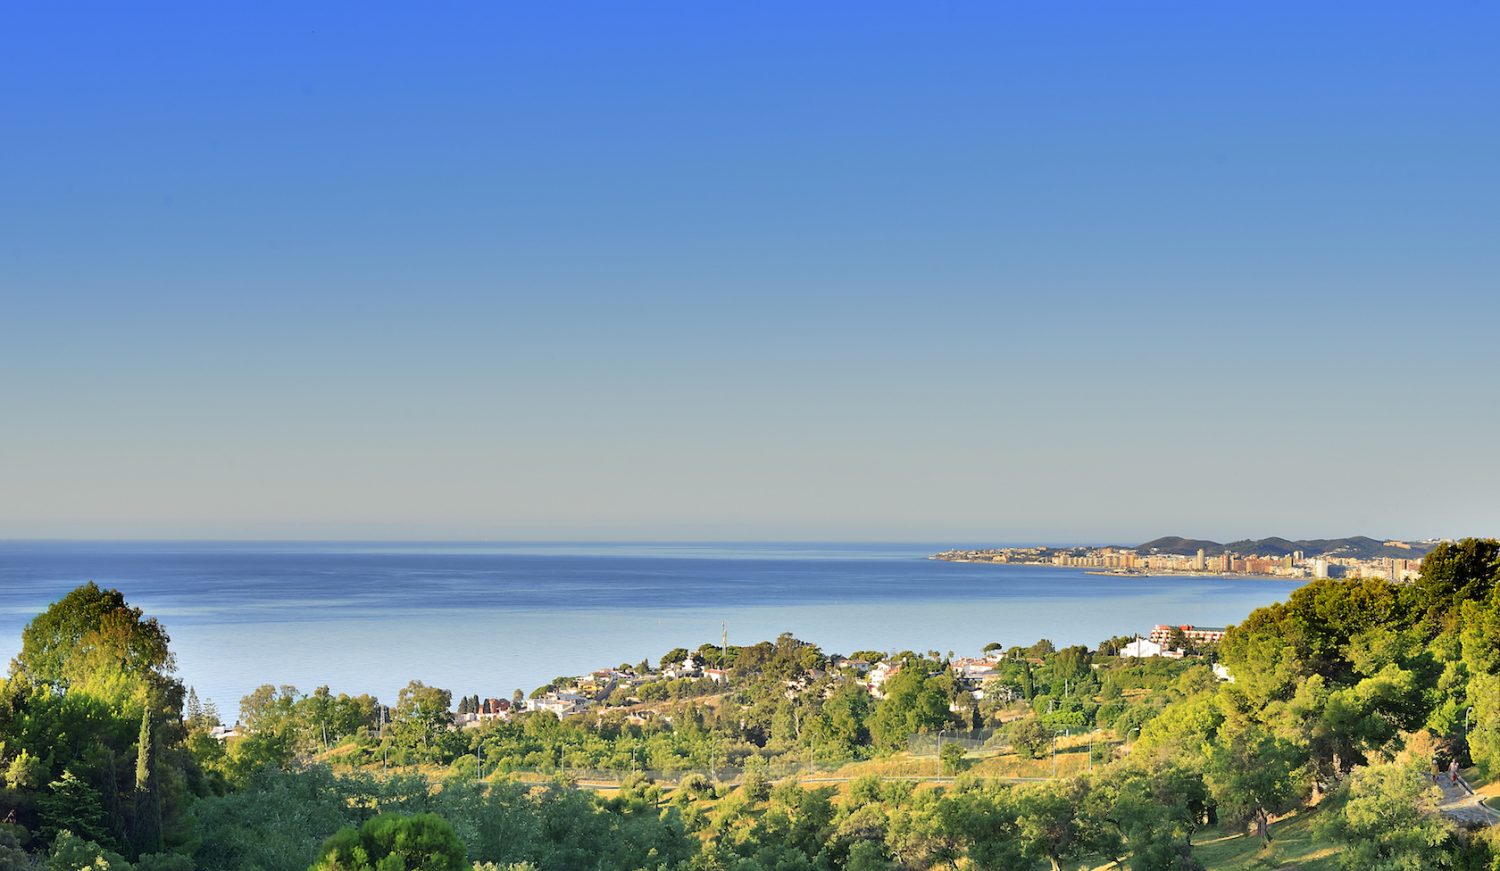 All villas feature stunning panoramic views of the Mediterranean Sea